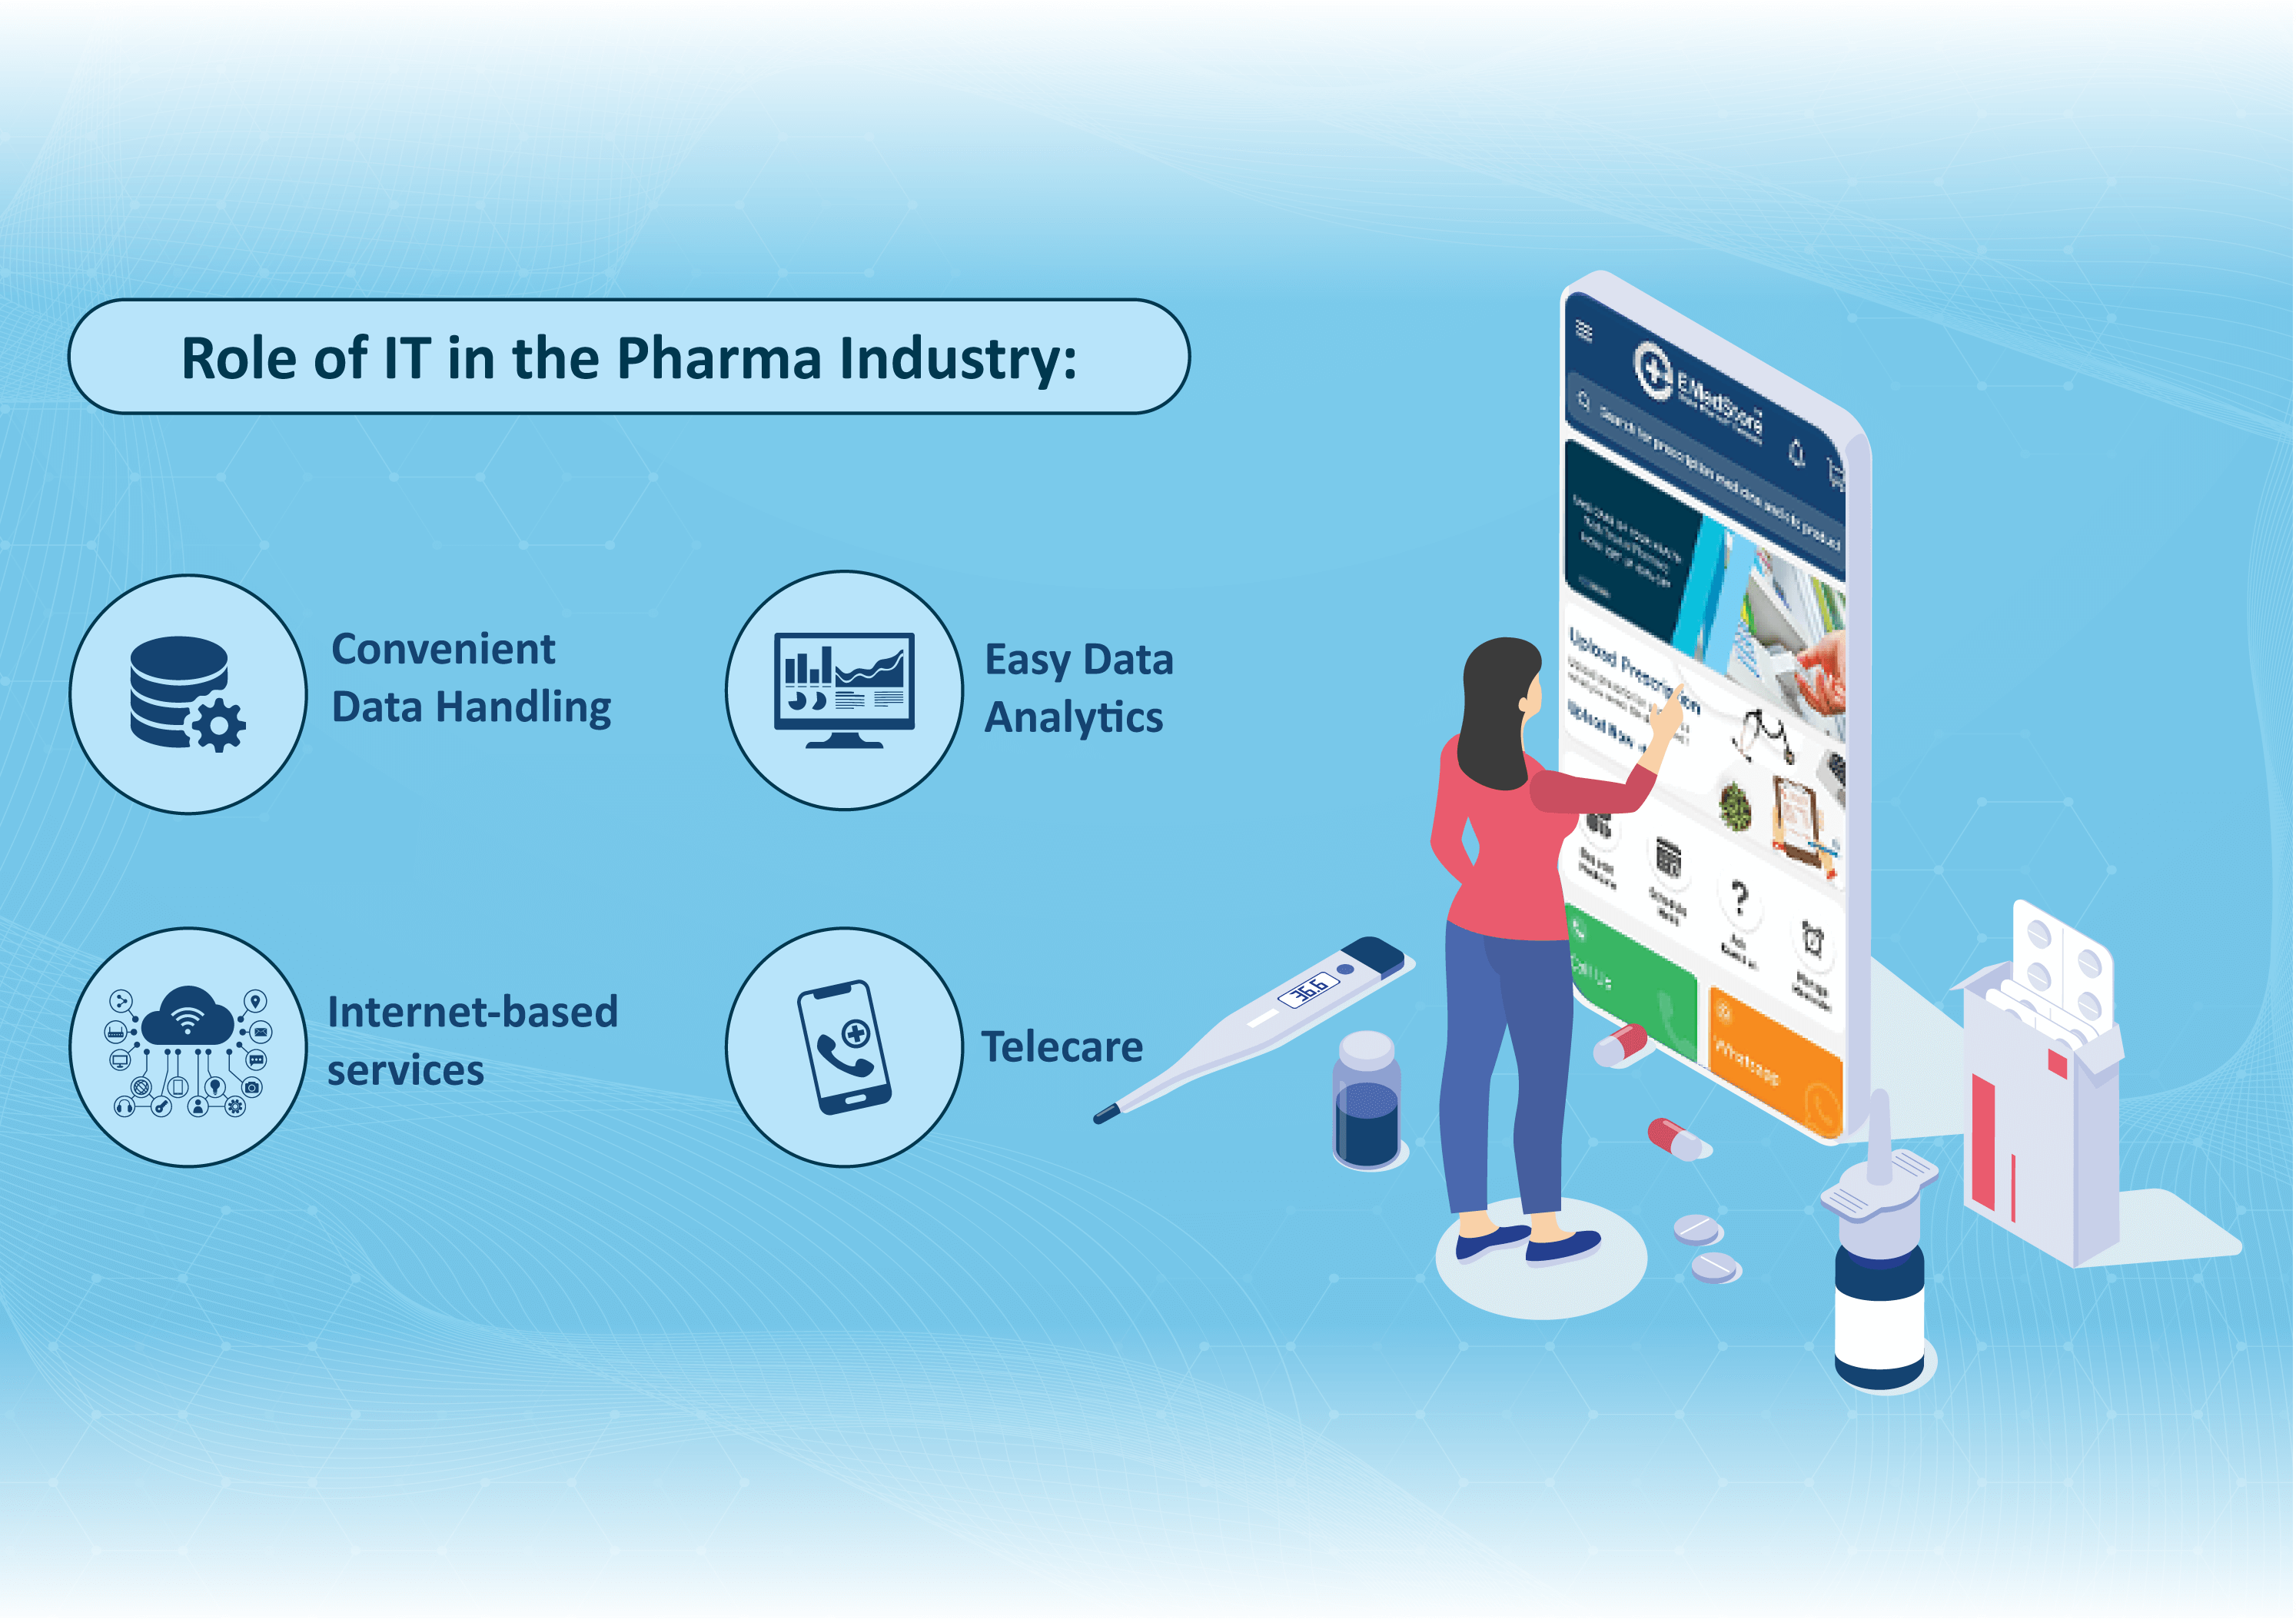 Role of IT in the Pharma Industry